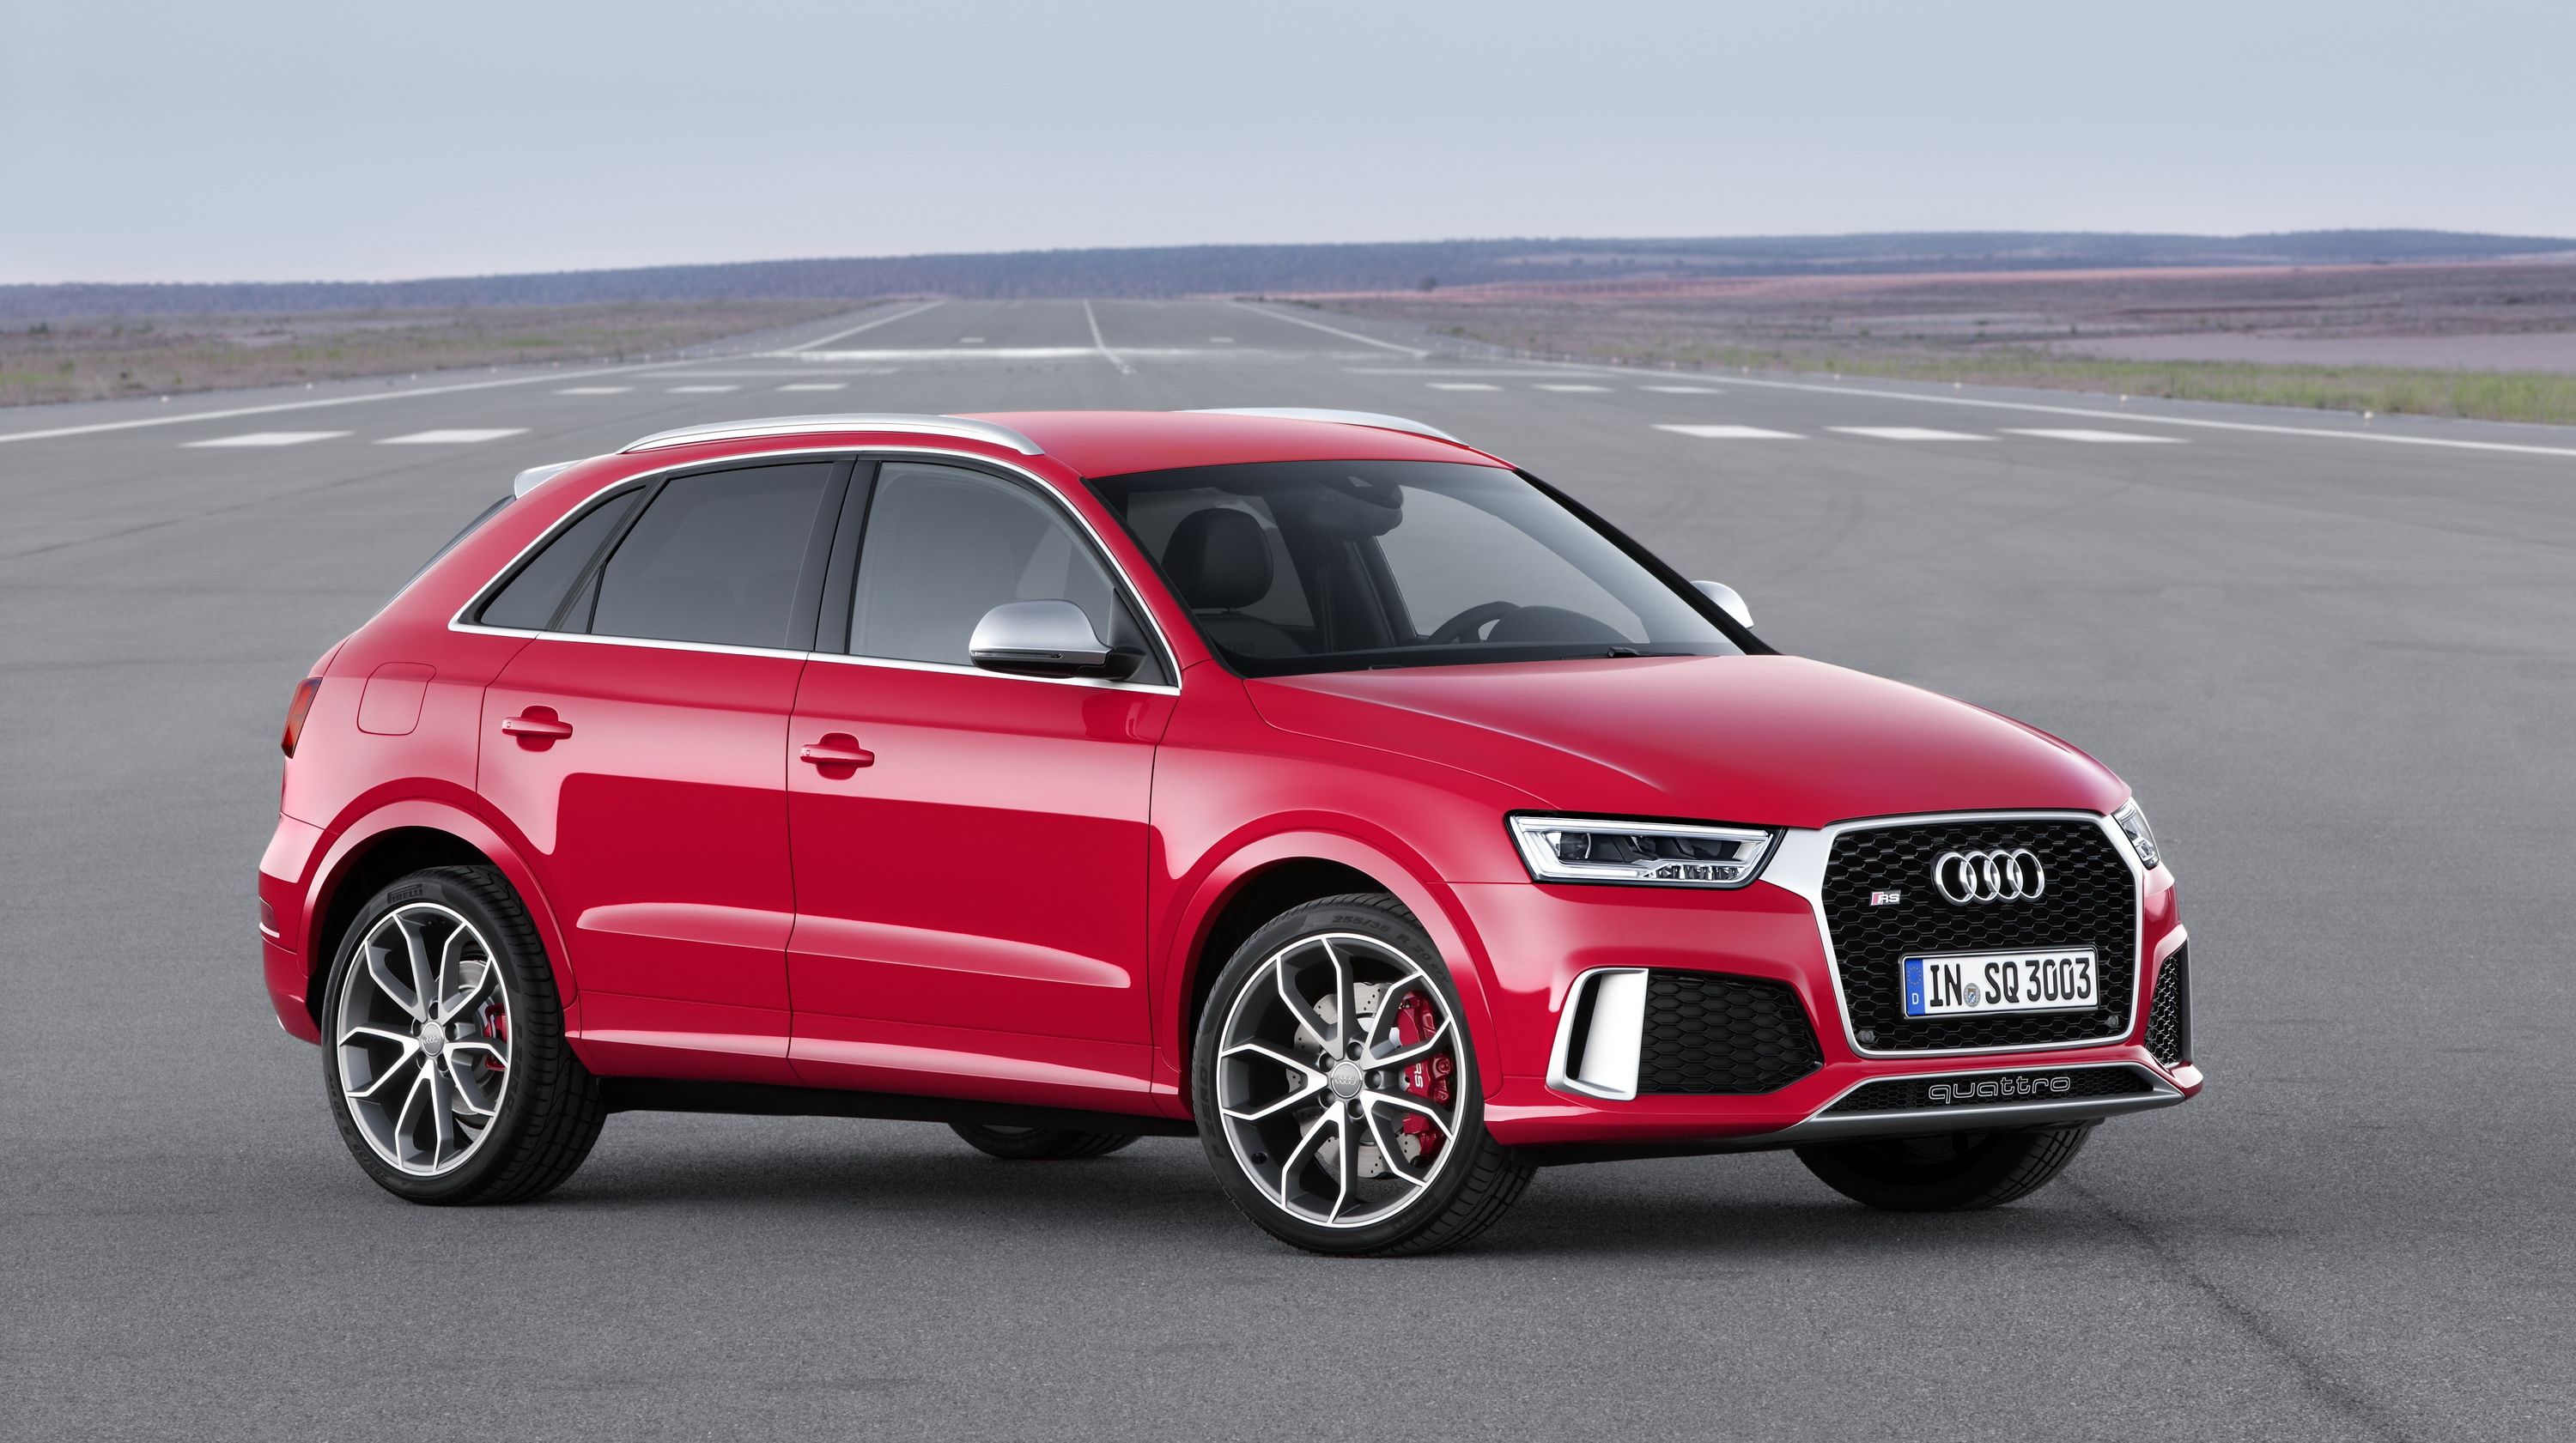  The lightly revised RS Q3 will arrive soon with respectable horsepower gains. Still no U.S. release date though. 